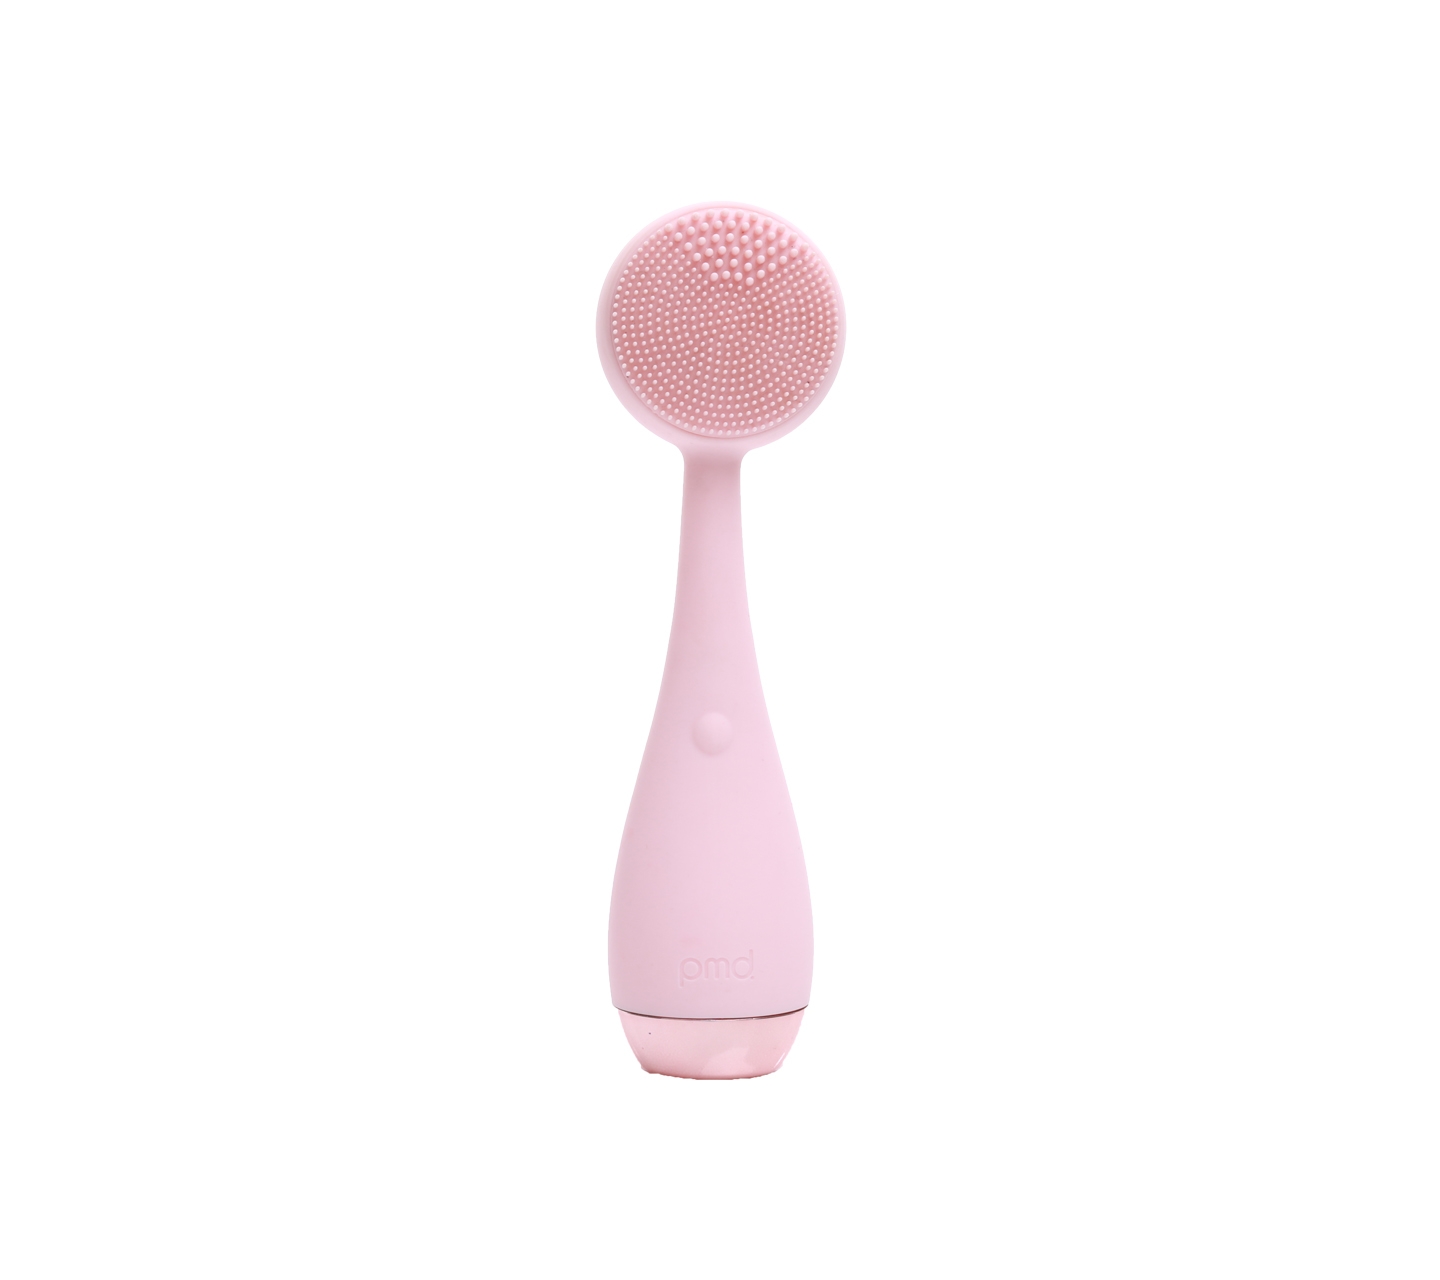 Pmd Beauty Smart Facial Cleansing Tools